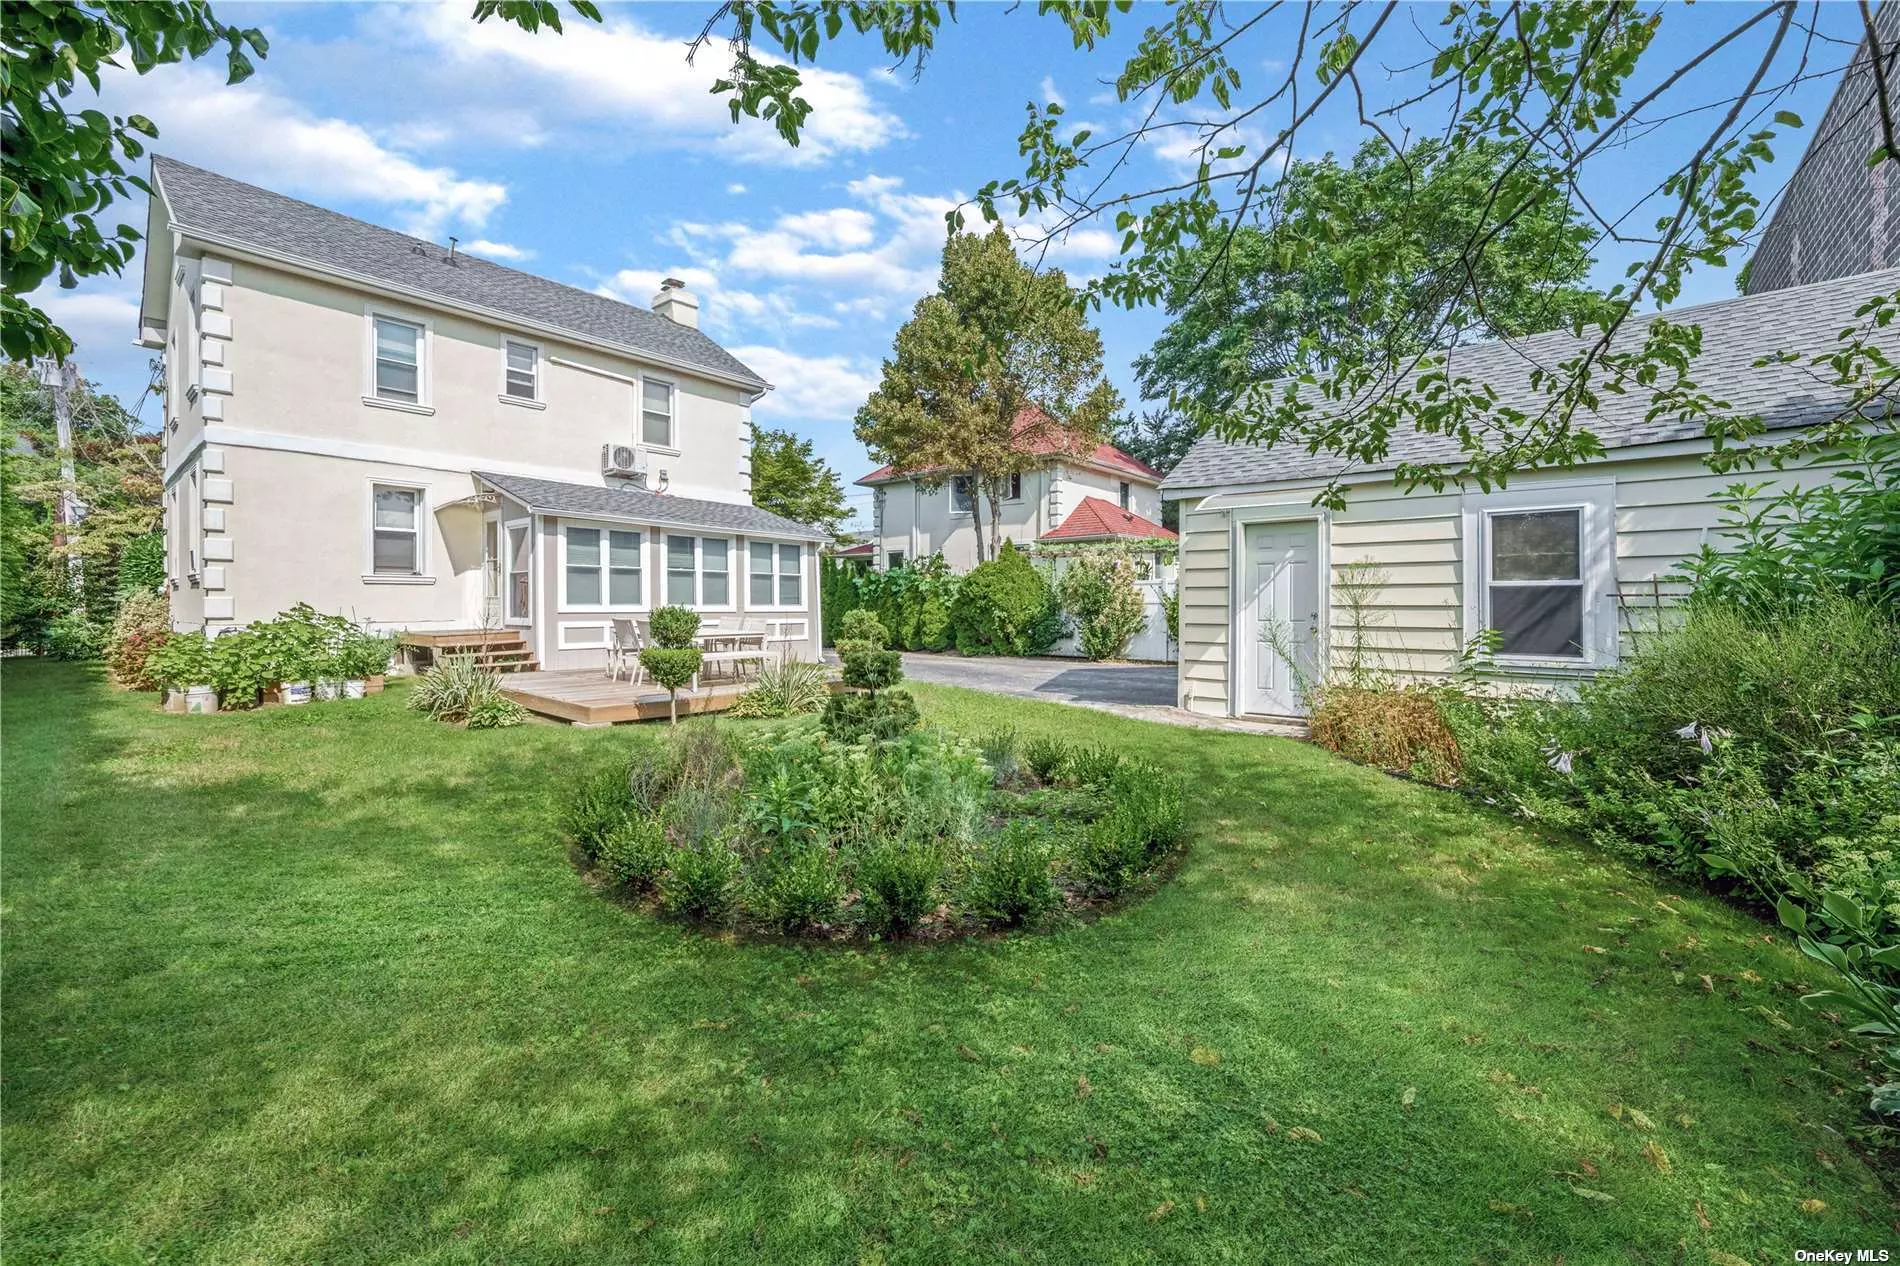 All renovated lovely 3 Br colonial in Manhasset. New bathrooms,  a few year old kitchen, New washer, dryer,  New boiler and hot water tank. New stucco outside Near LIRR, transportation , shopping and schools.